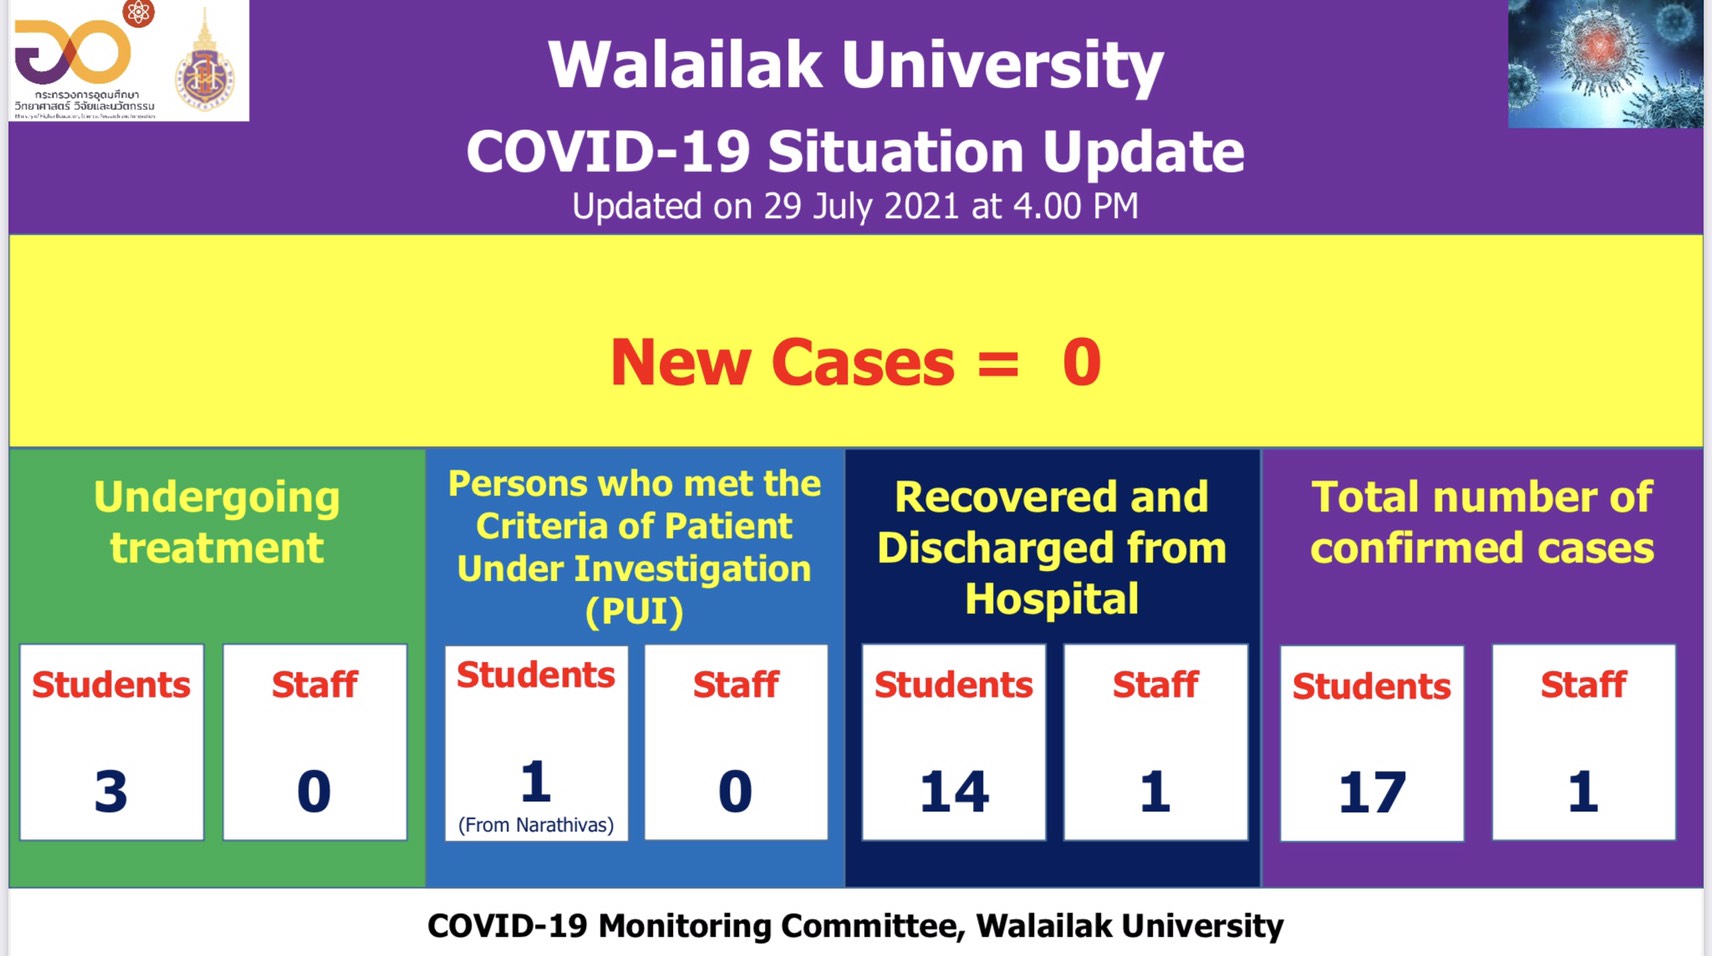 Covid-19 Situation Report of Walailak University - 29 July, 2021